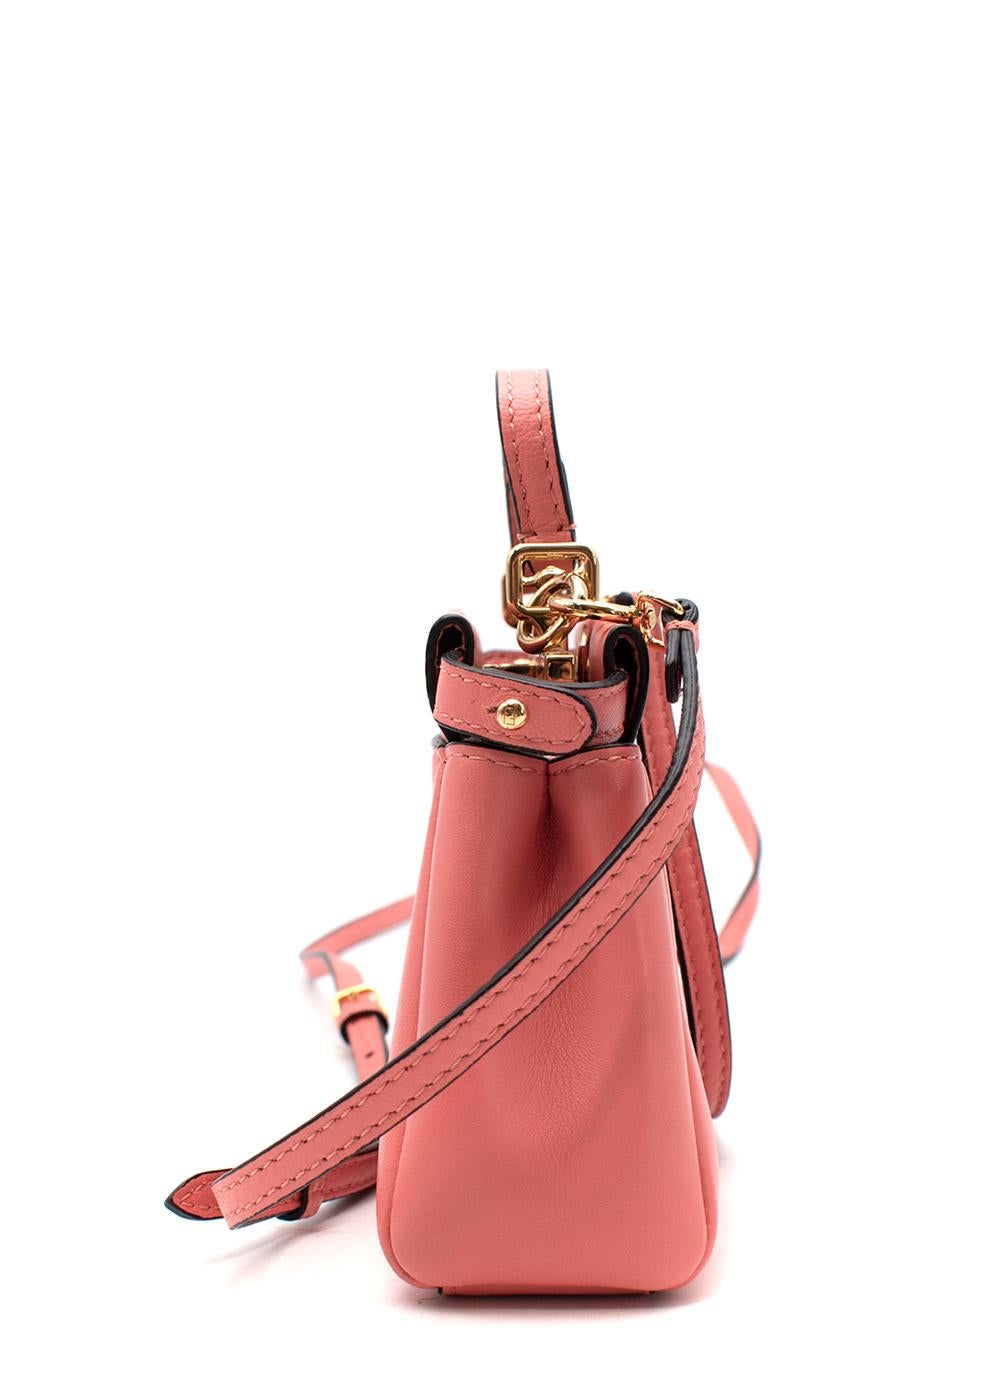 Fendi Coral-Pink Leather Mini Pocket Peekaboo Bag

- Micro itineration of the iconic Peekaboo bag
- Gold-tone metal twist lock, opens to 2 compartments and slip pocket
- Flat, single top handle, and adjustable, removable crossbody strap

Materials: